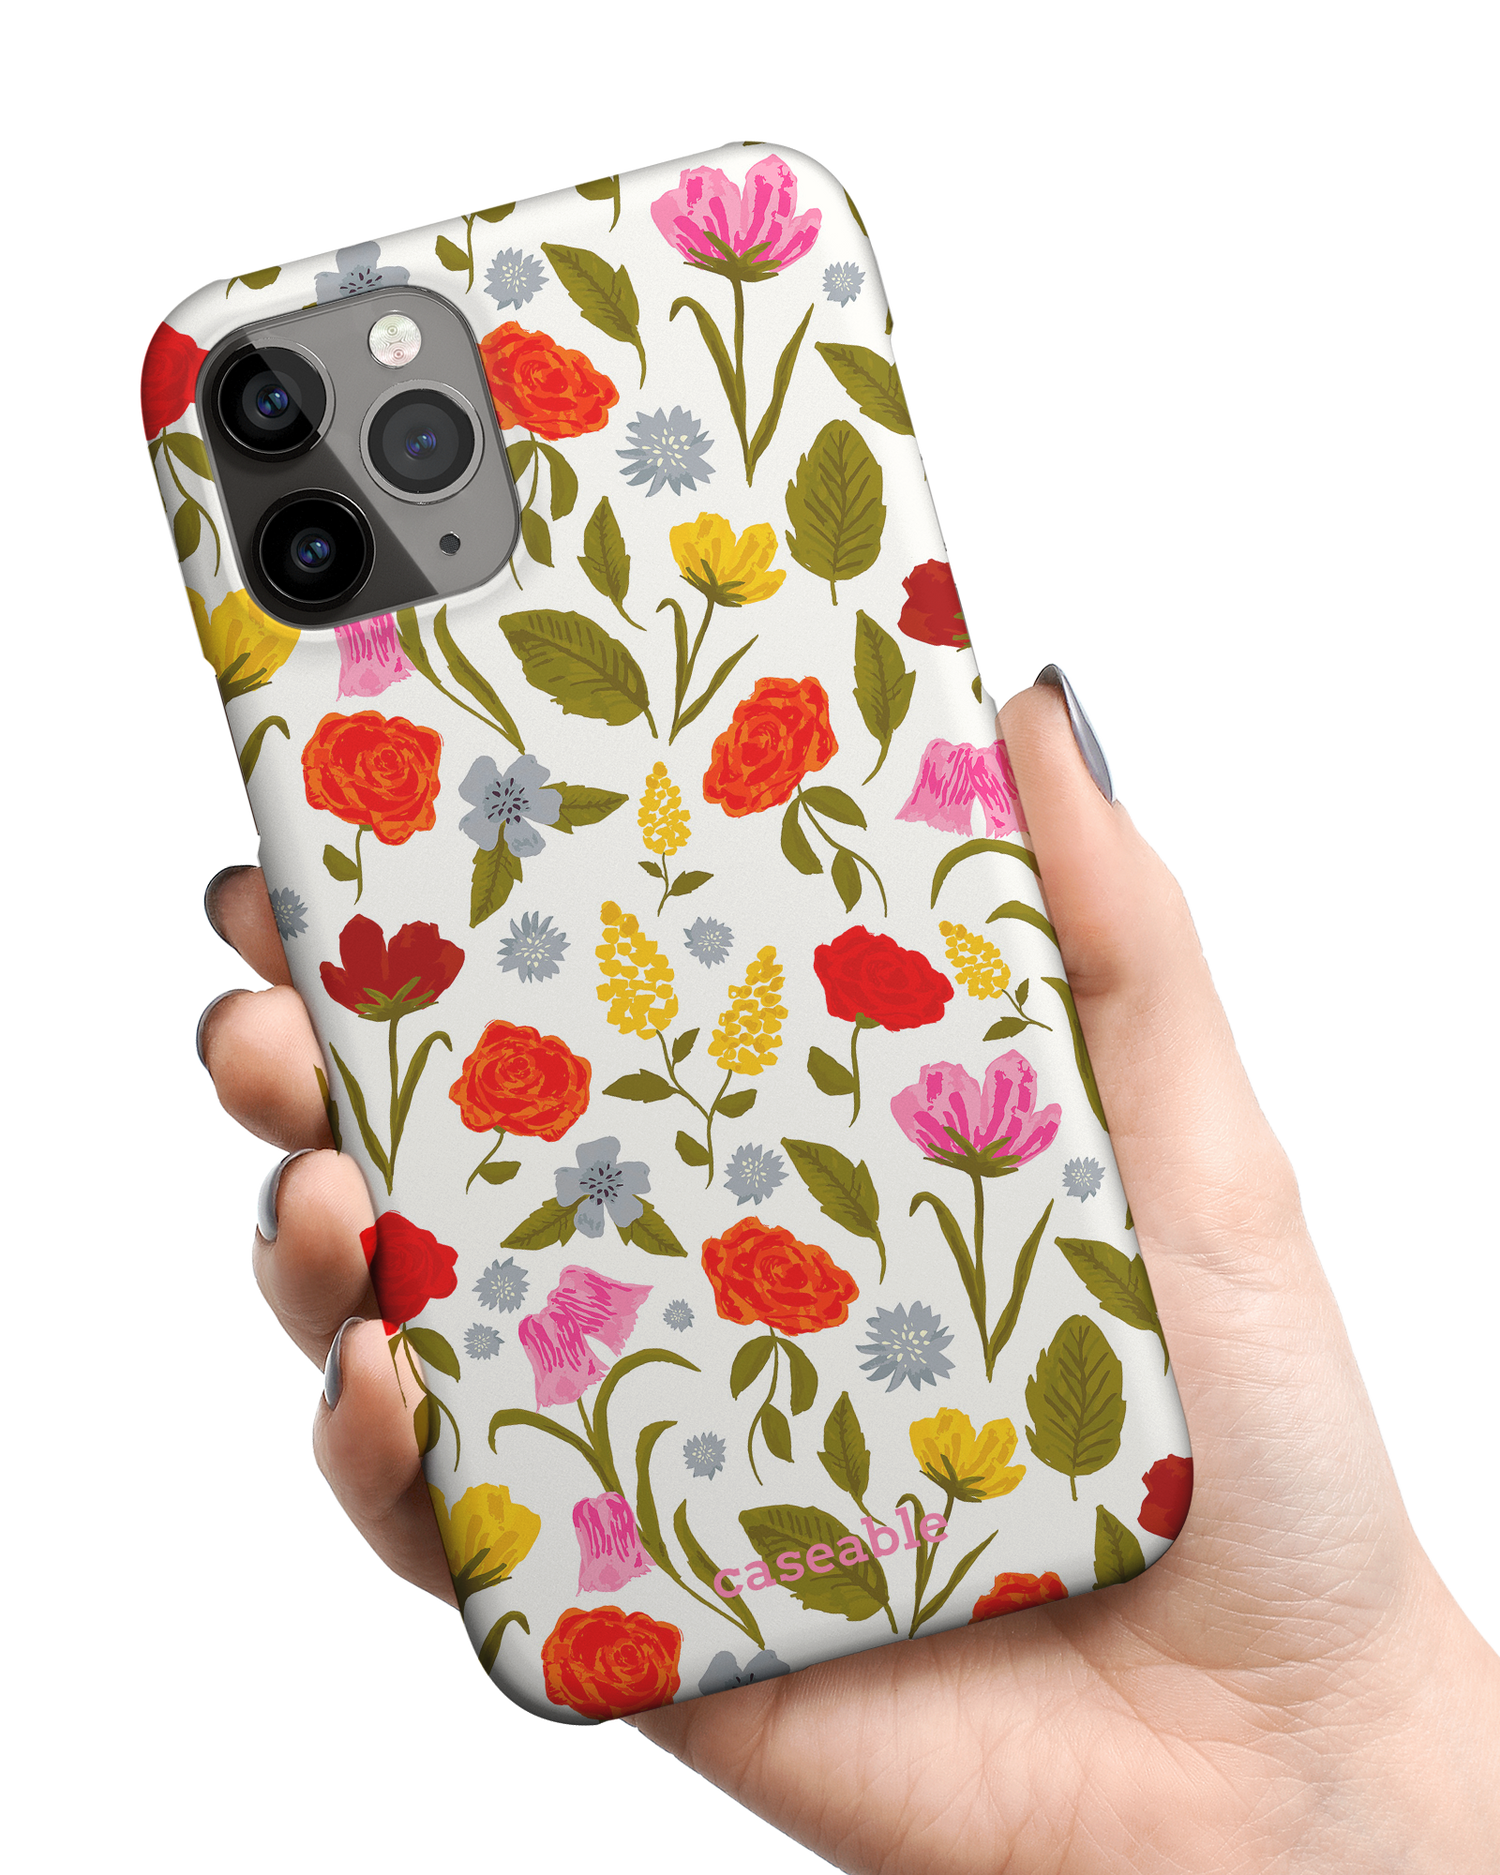 Botanical Beauties Hard Shell Phone Case Apple iPhone 11 Pro Max held in hand